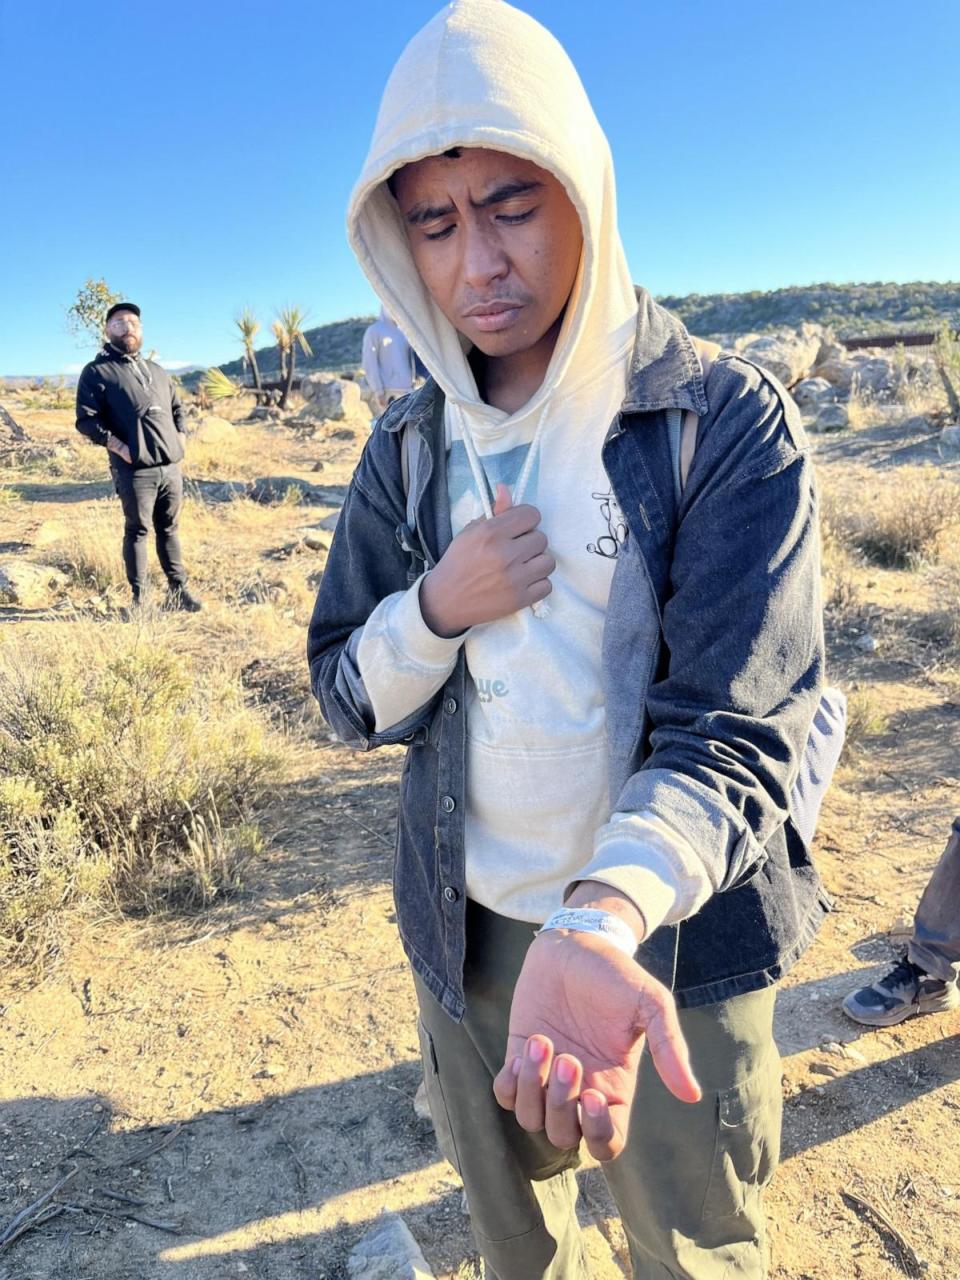 PHOTO: A migrant is shown wearing a white bracelet given to him by Border Patrol agent. (Mireya Villarreal/ABC News)